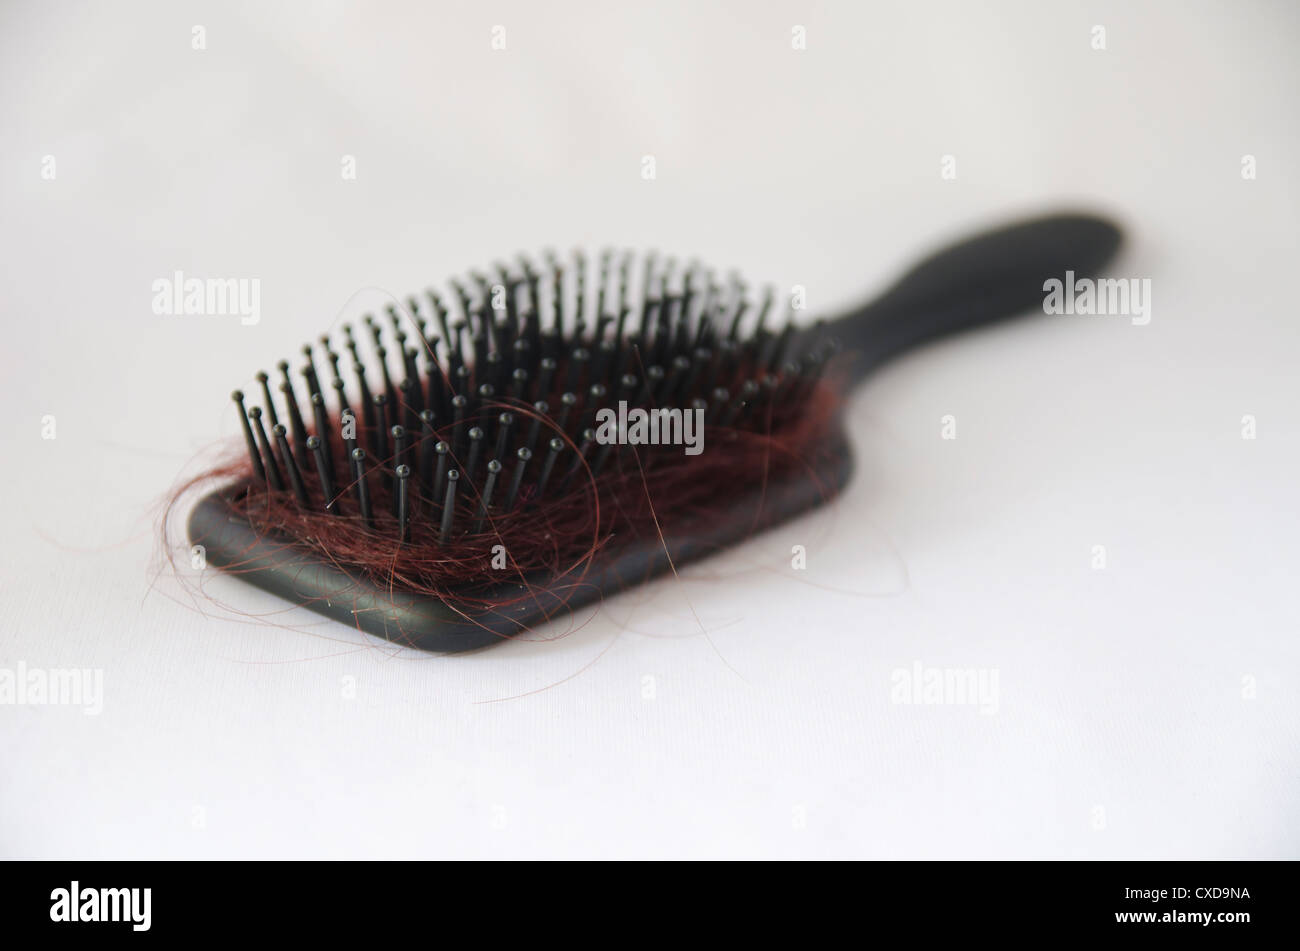 Black hair brush with hair on it on white background Stock Photo